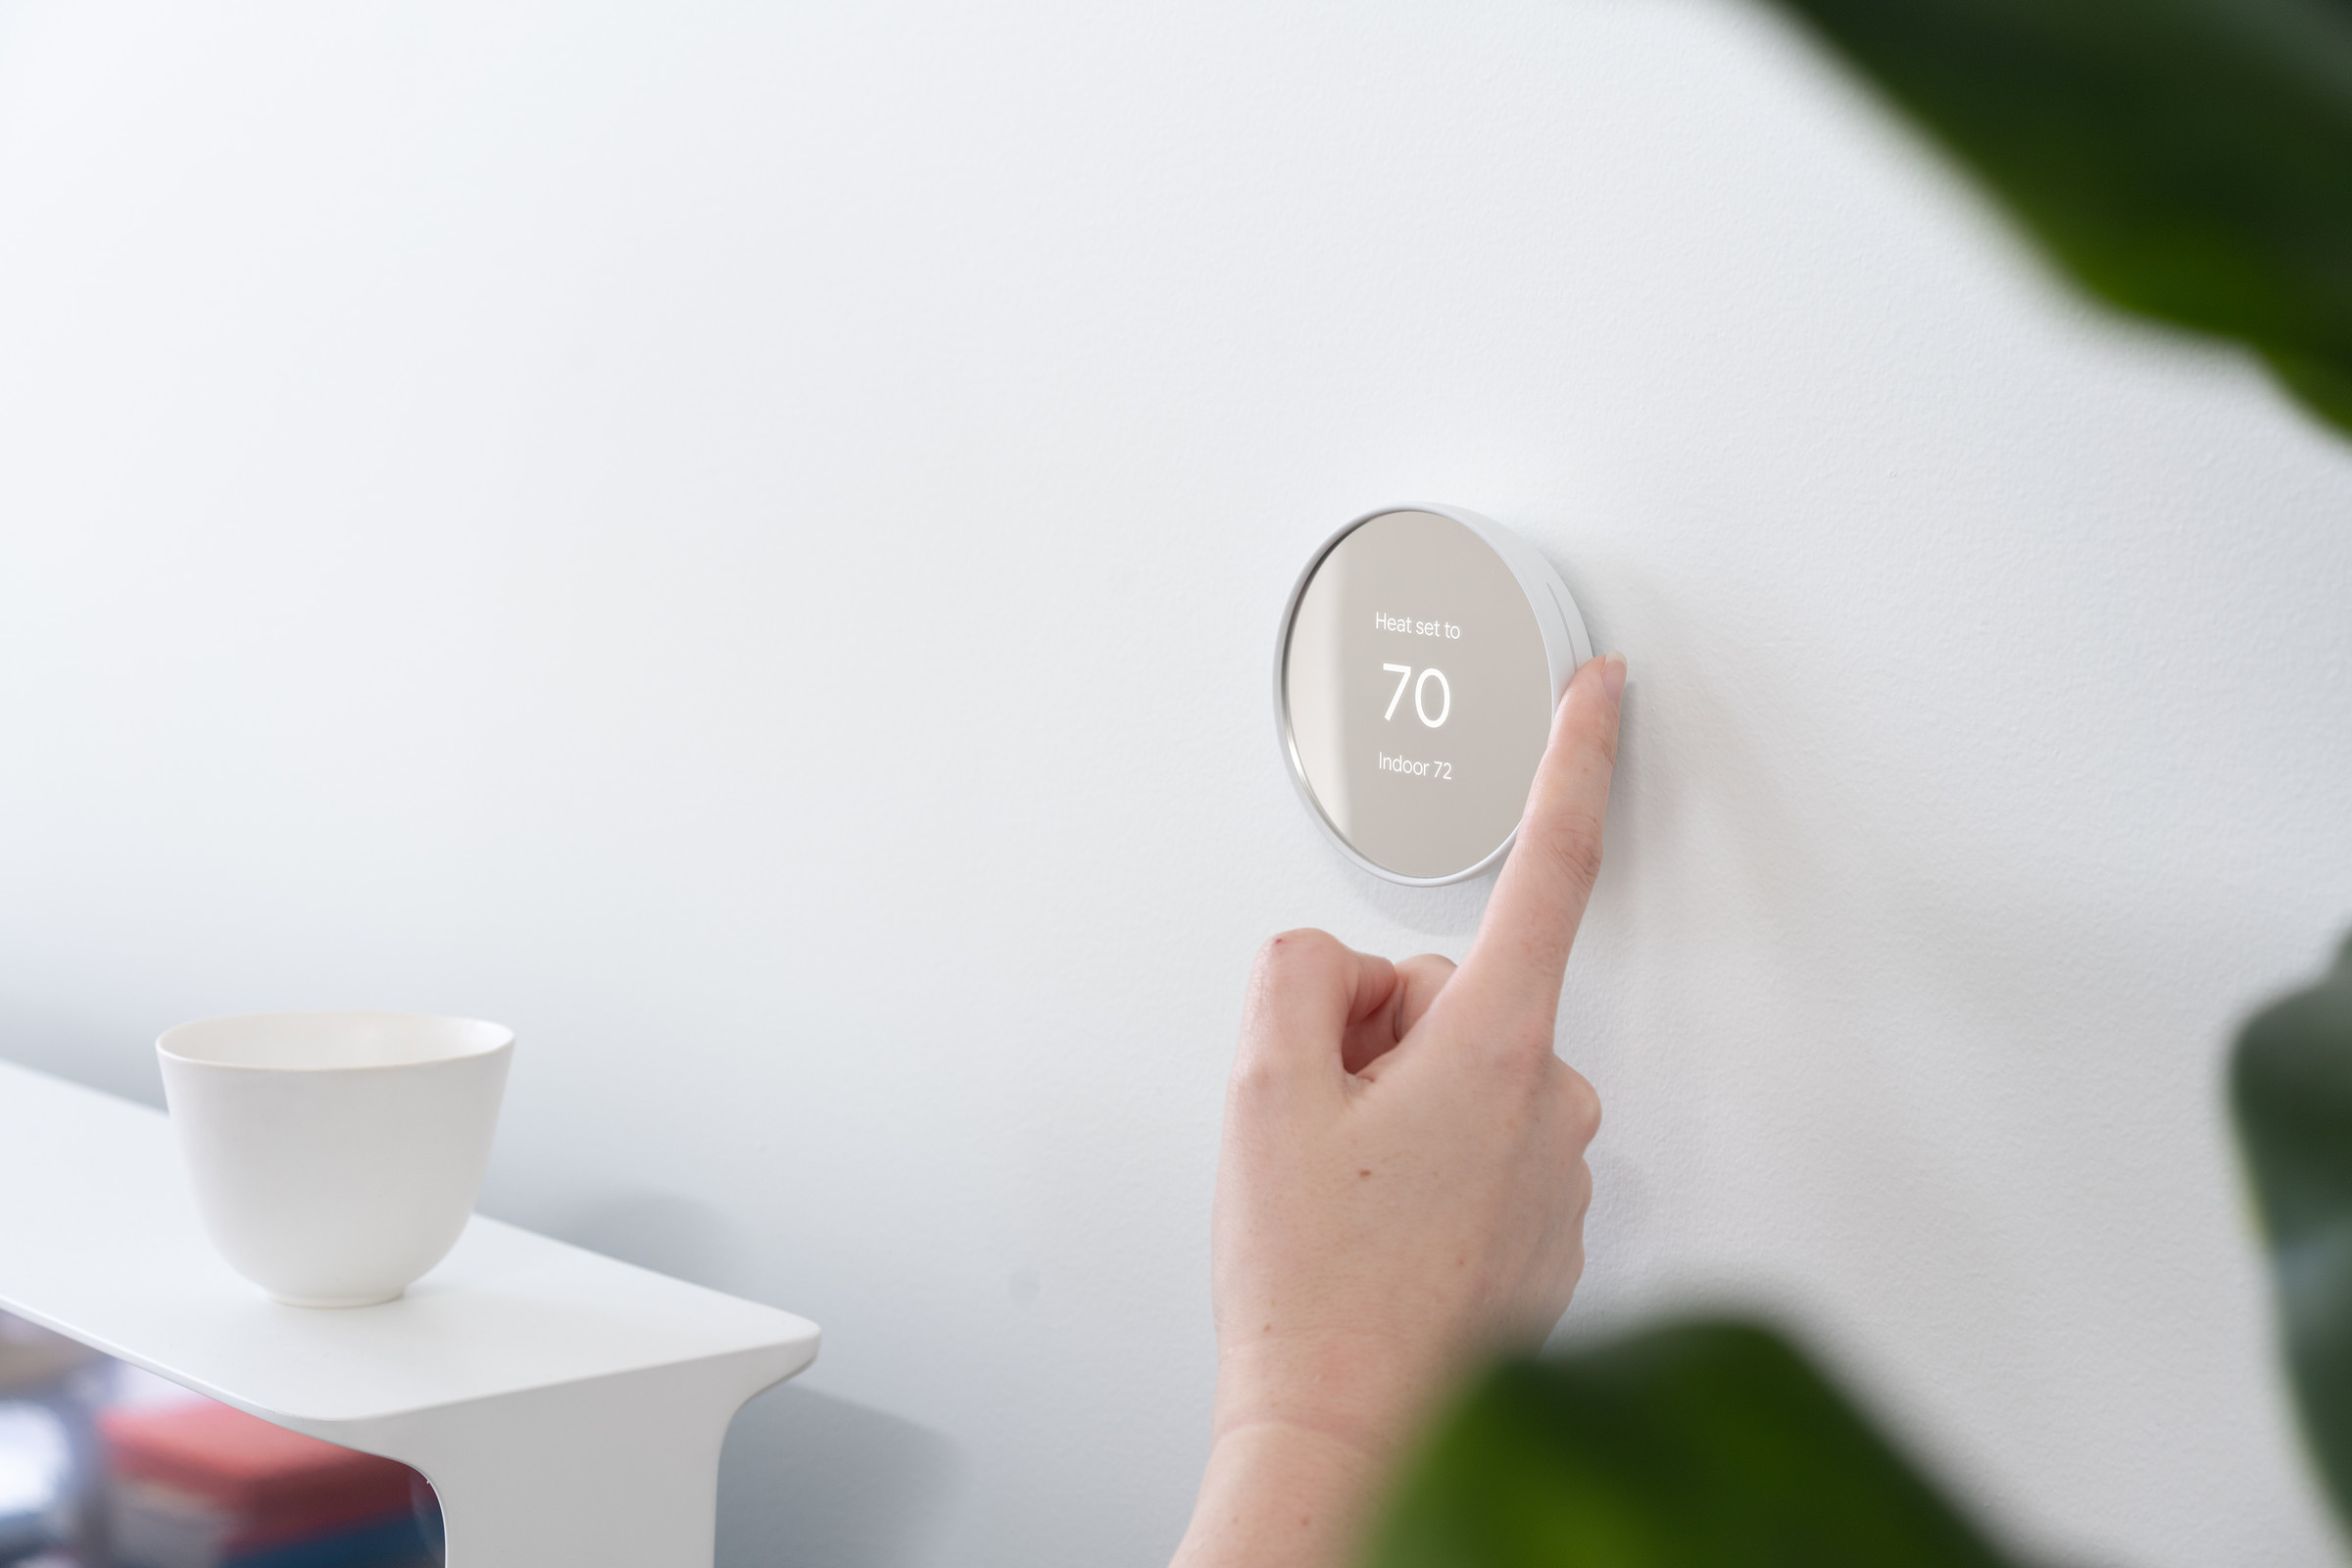 The new Nest Thermostat ditches the traditional rotating dial for a simpler, touch strip control system